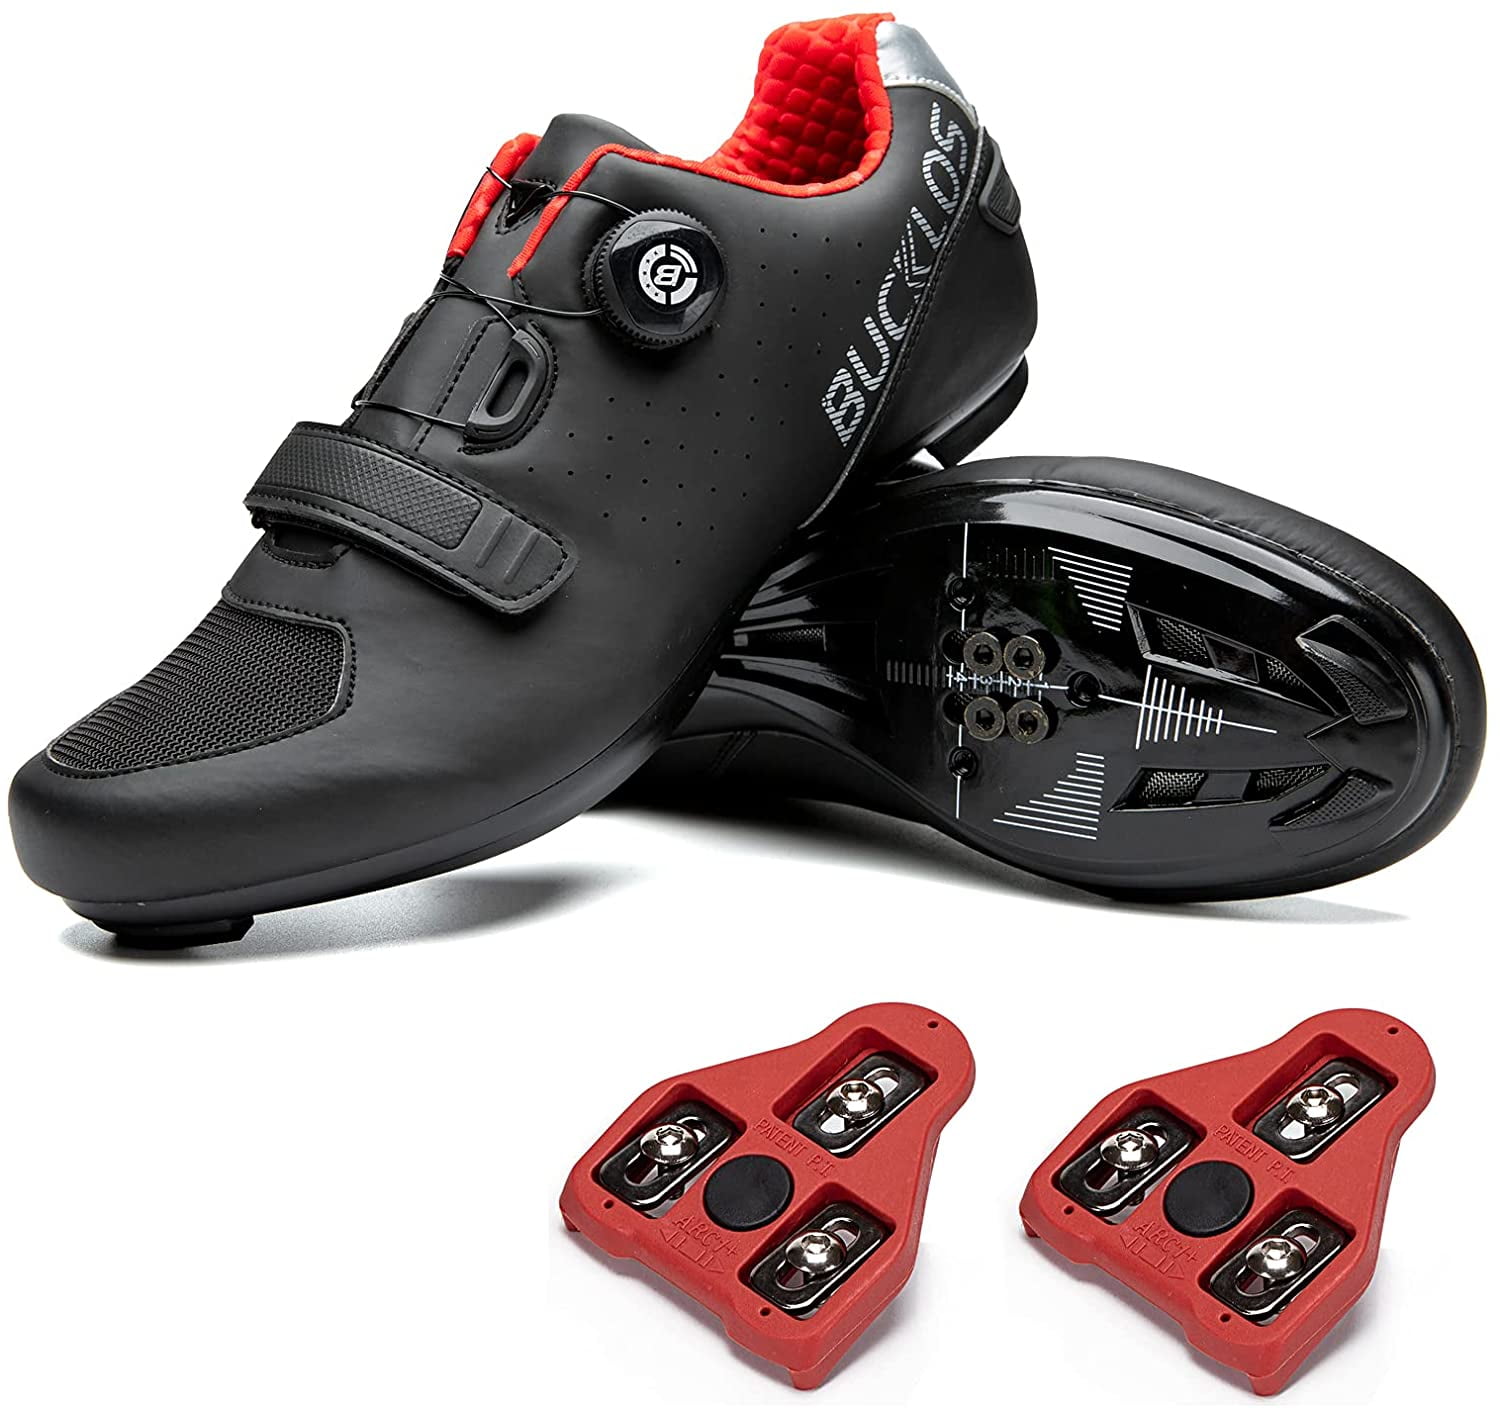 Professional City Road Cycling Shoes Men Outdoor Bike SPD Cleat Bicycle Sneakers 